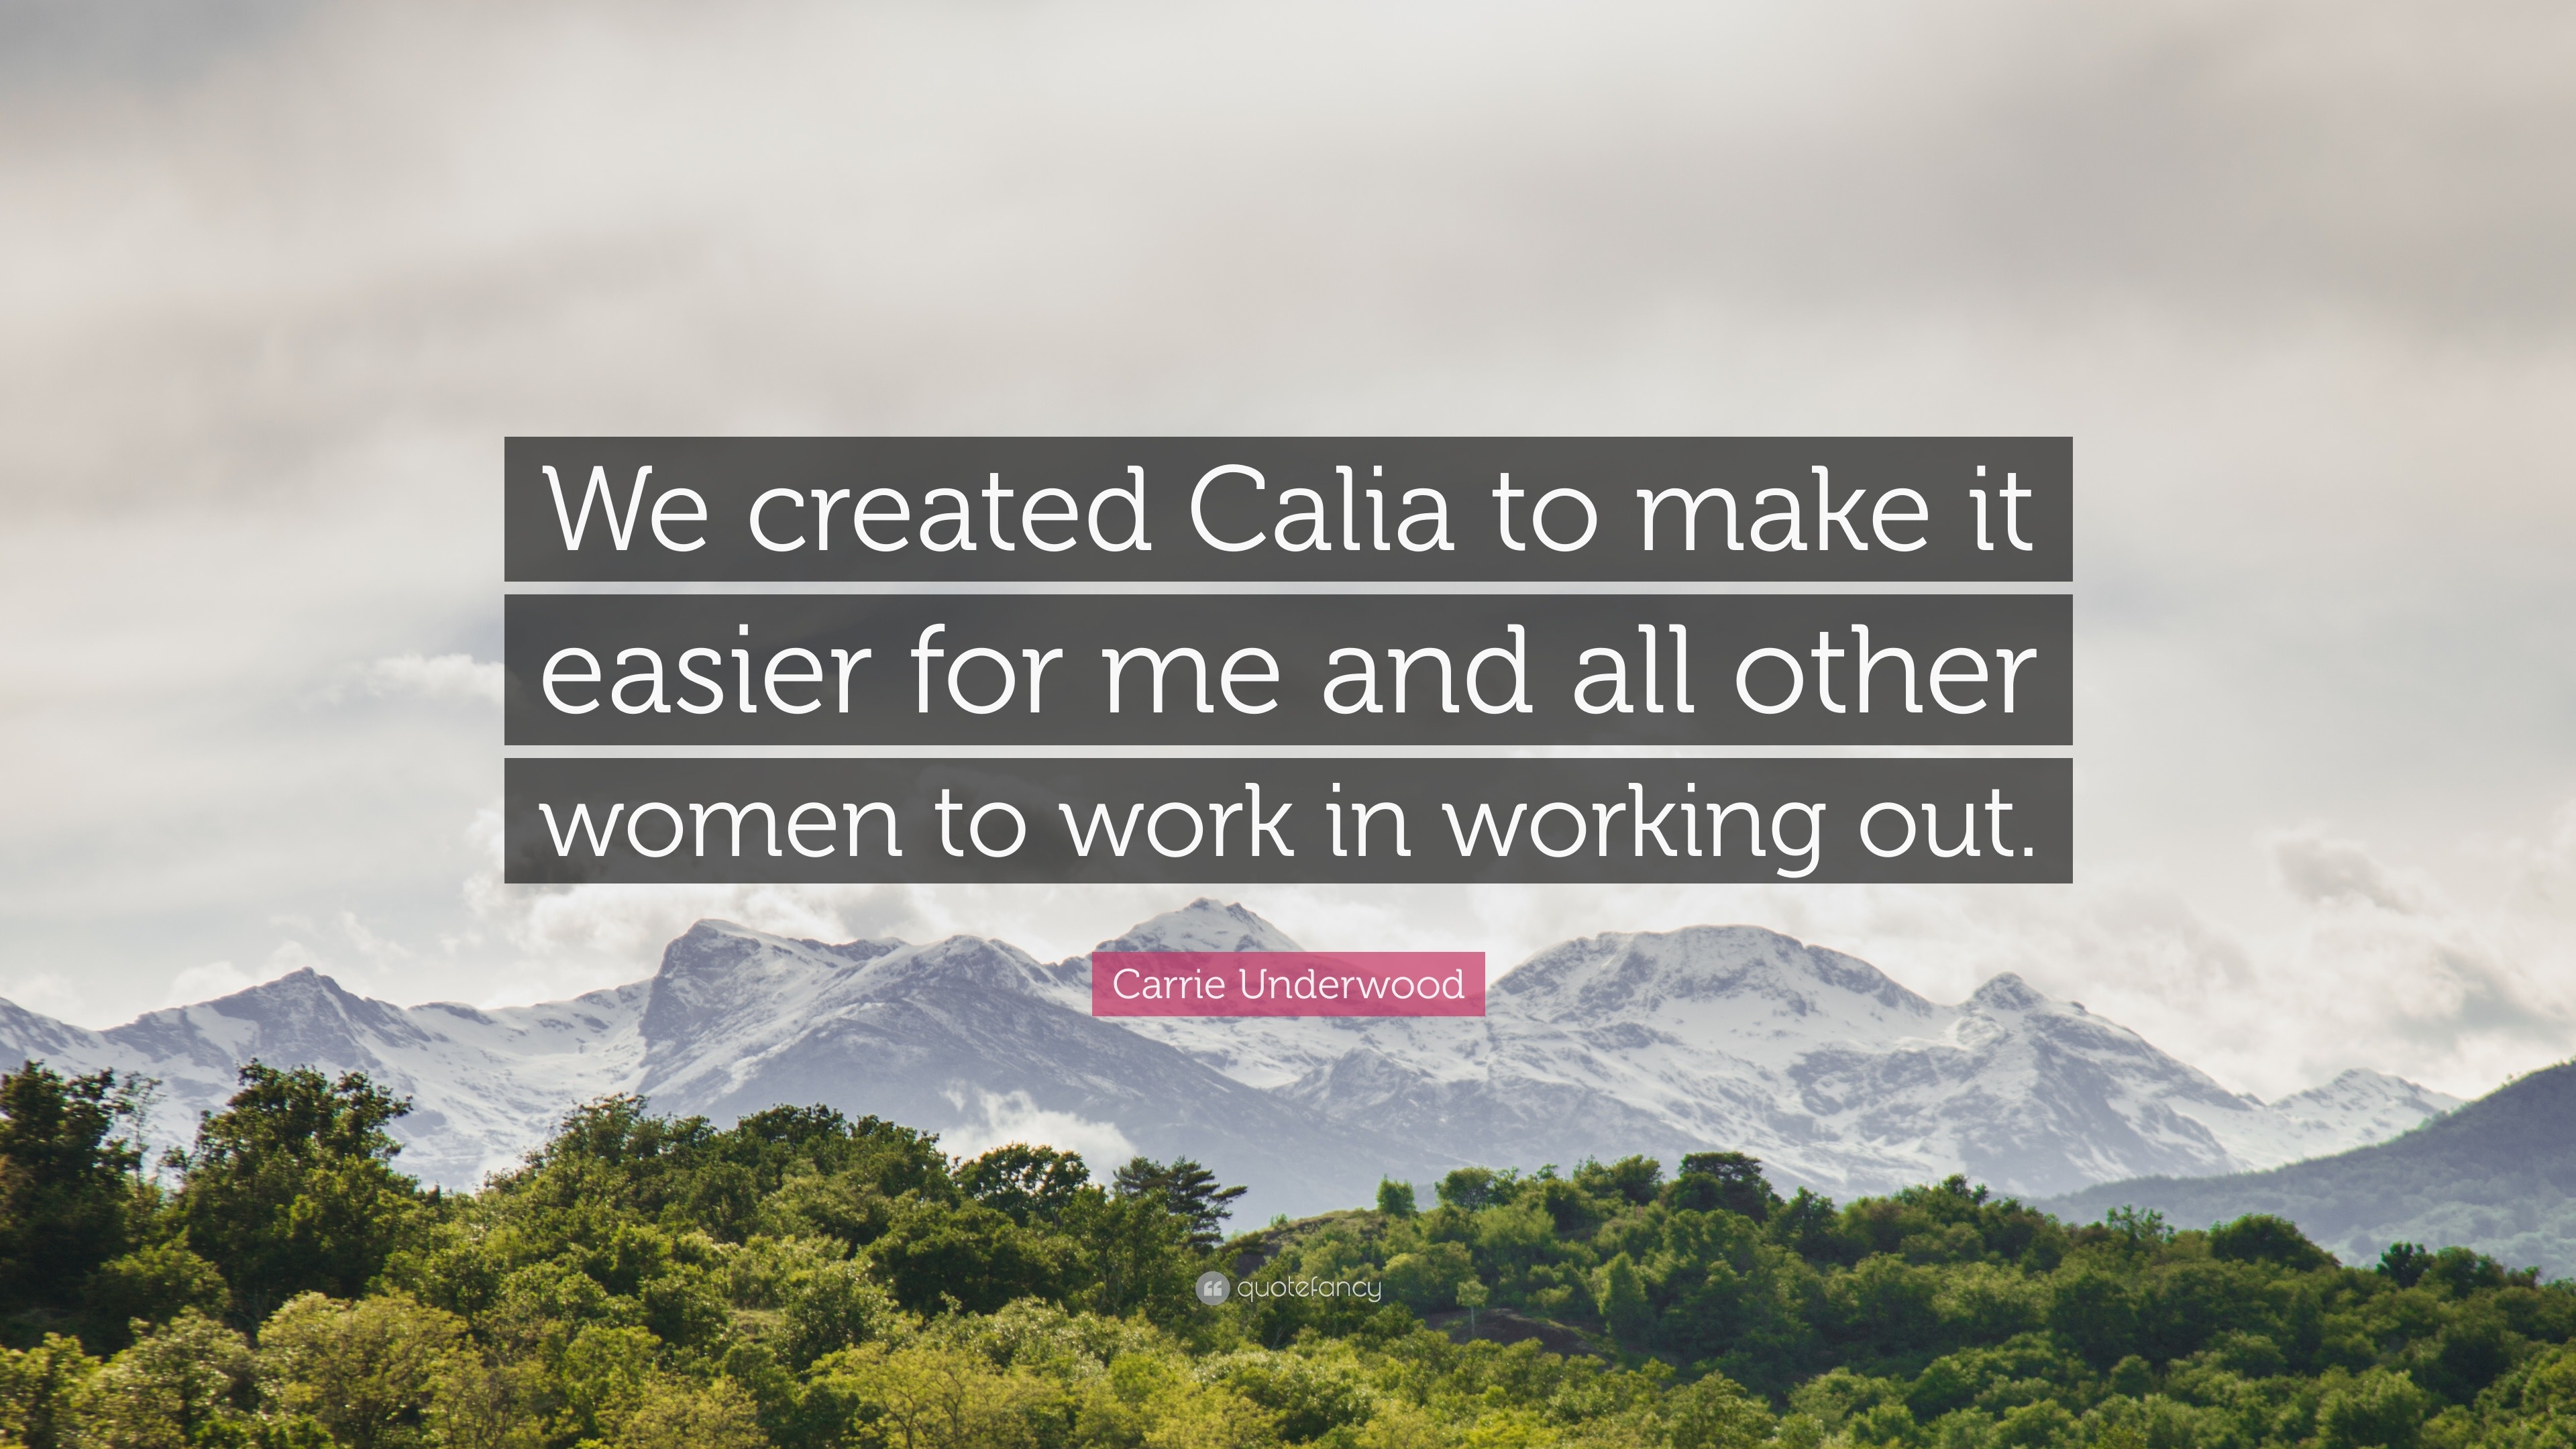 https://quotefancy.com/media/wallpaper/3840x2160/763891-Carrie-Underwood-Quote-We-created-Calia-to-make-it-easier-for-me.jpg